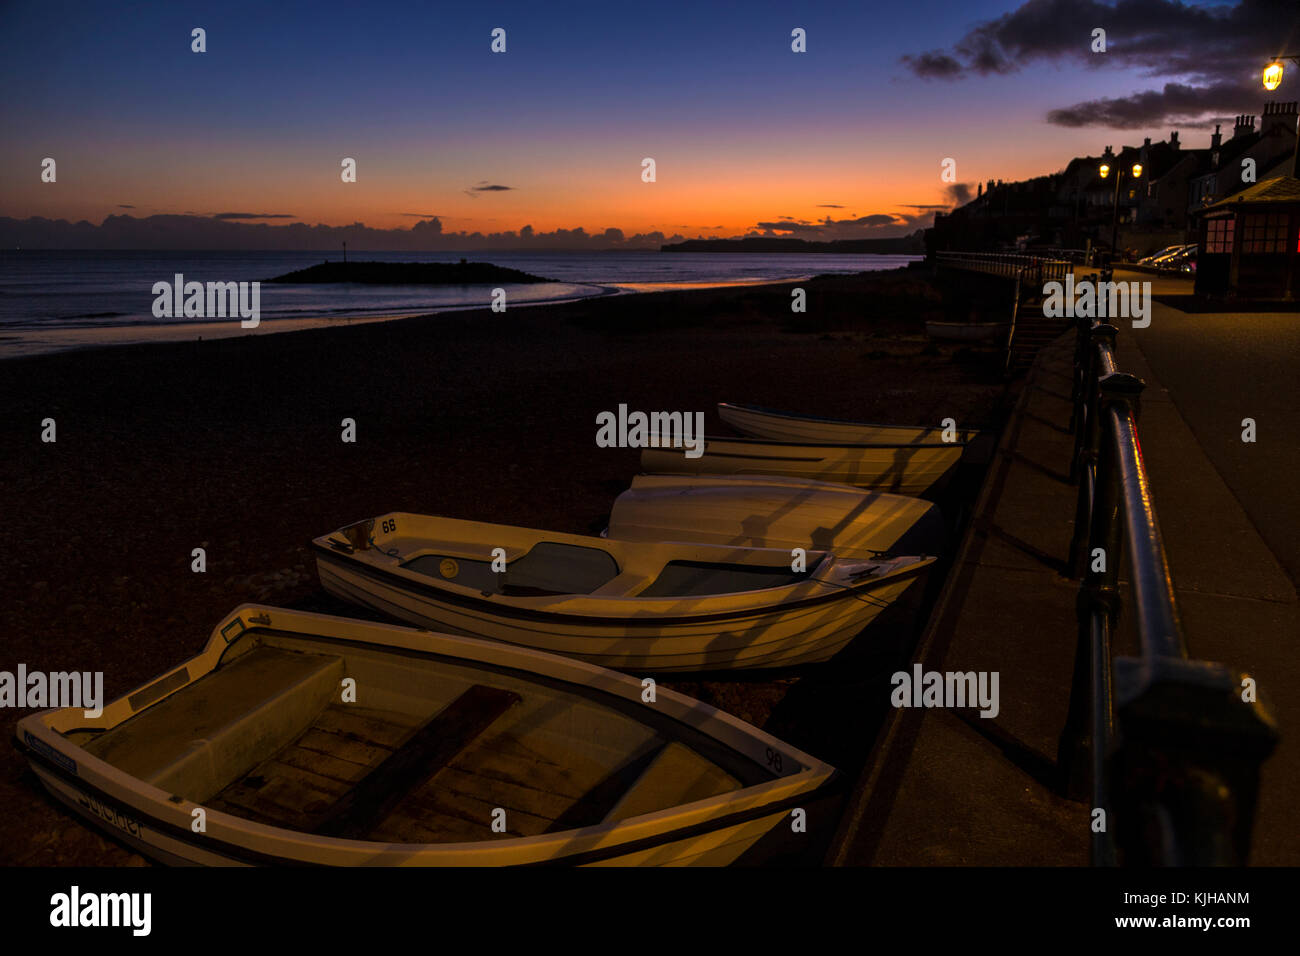 Sidmouth, Devon, 25th Nov 17 Following a frosty start, the day continued cold and clear in Devon. A  beautiful sunset on Sidmouth beach. Tony Charnock/Alamy Live News Stock Photo